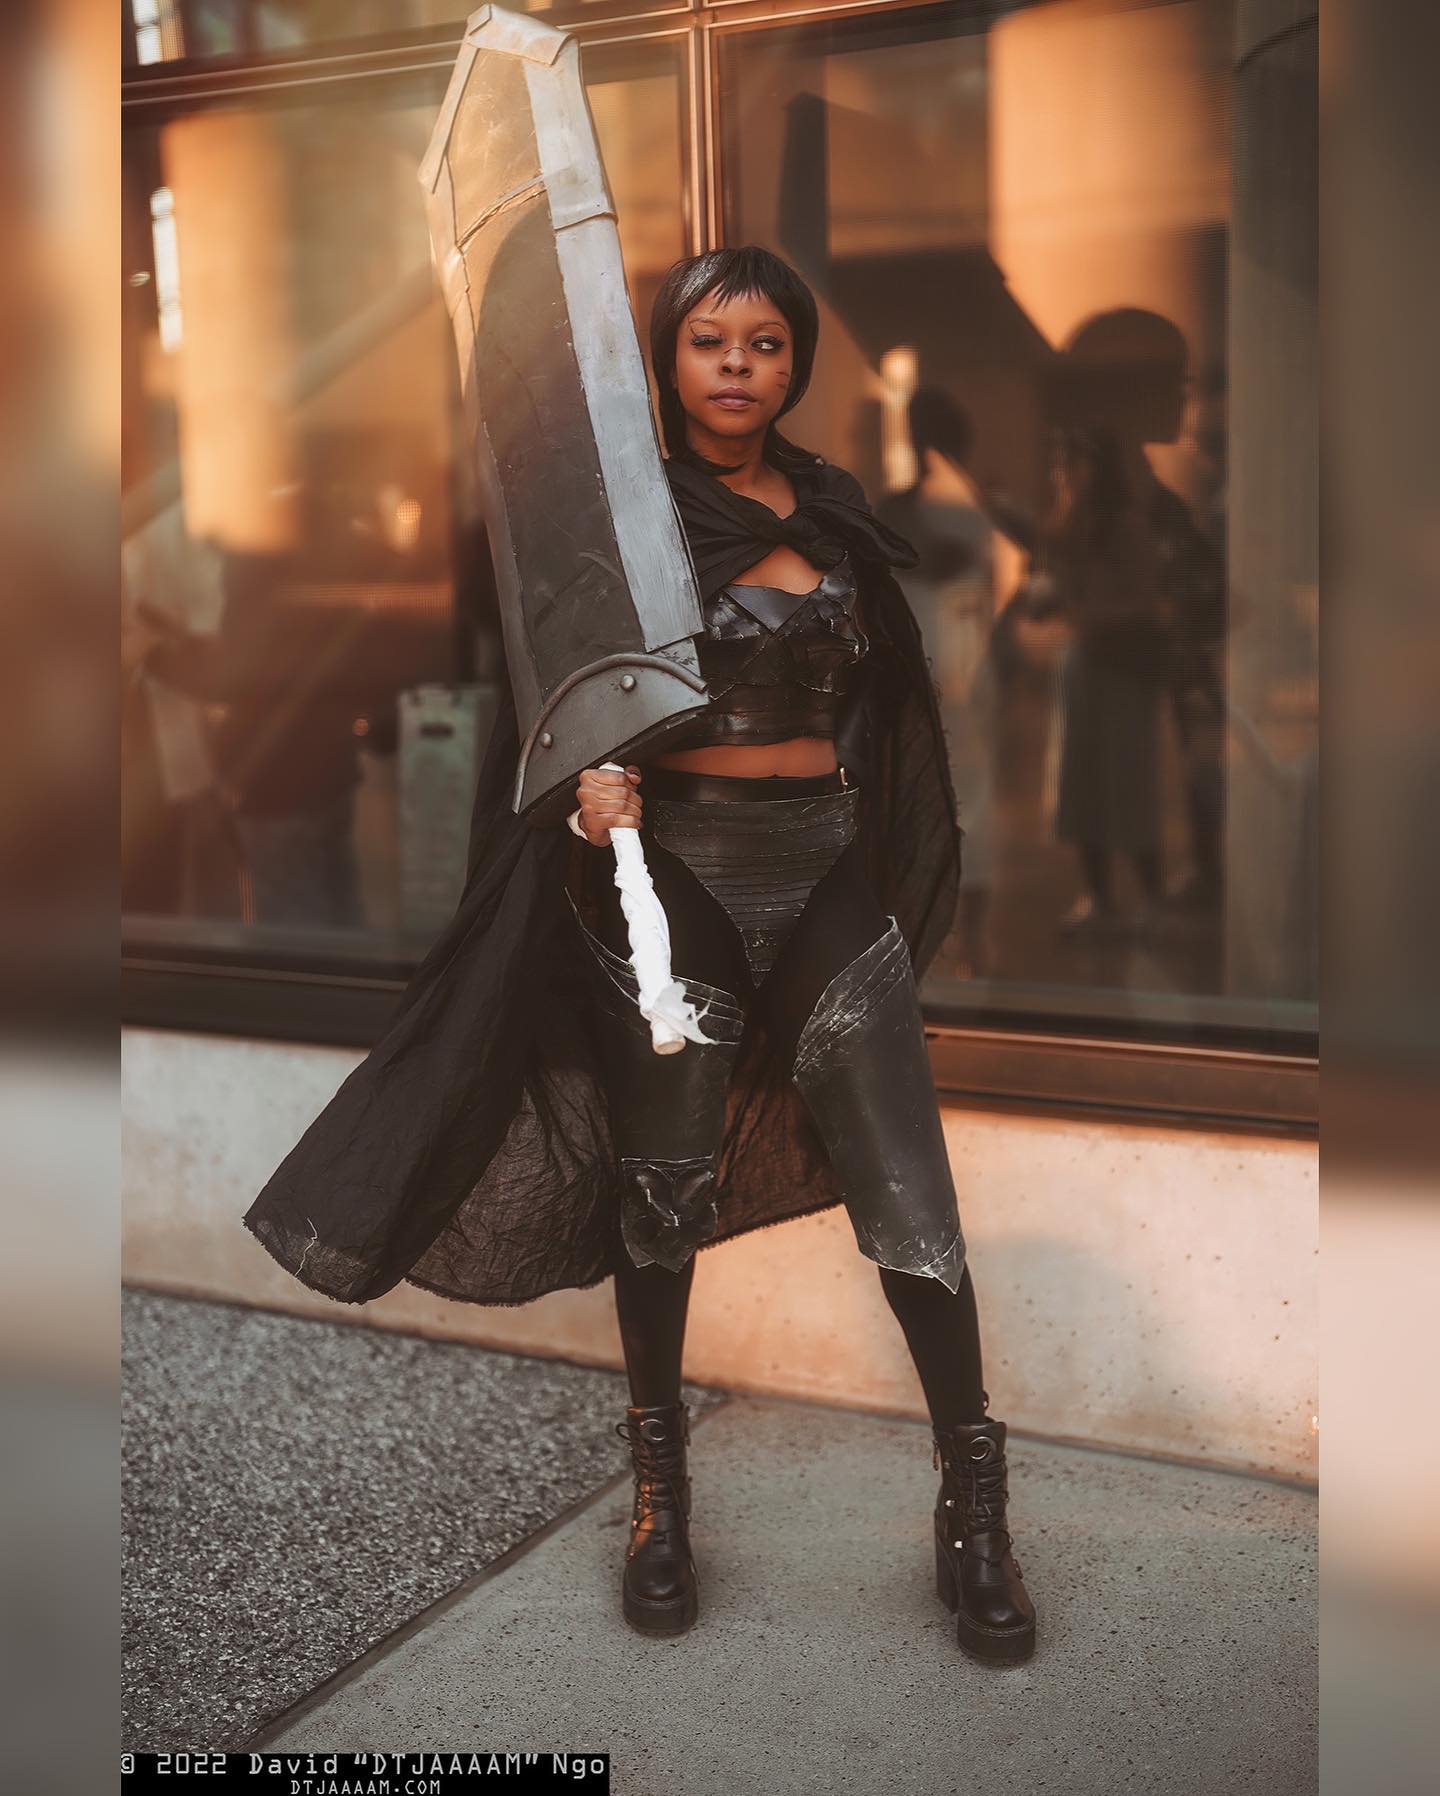 Not to worry, here’s real actual historic images of me on my way to save the world from the eclipse and The God Hand🌗🌘☀️⛅️
Source? Me⚔️
•
•
•
•
•
•
•
#guts #berserk #eclipse #eclipse2024 #gutsca #casca #cosplay #cosplayer #cosplaying #chibith0t #beserkcosplay #berserkeclipse #anime #manga #animecosplay #foamsmith #cosplaybuild #gutsberserk #gutscosplay